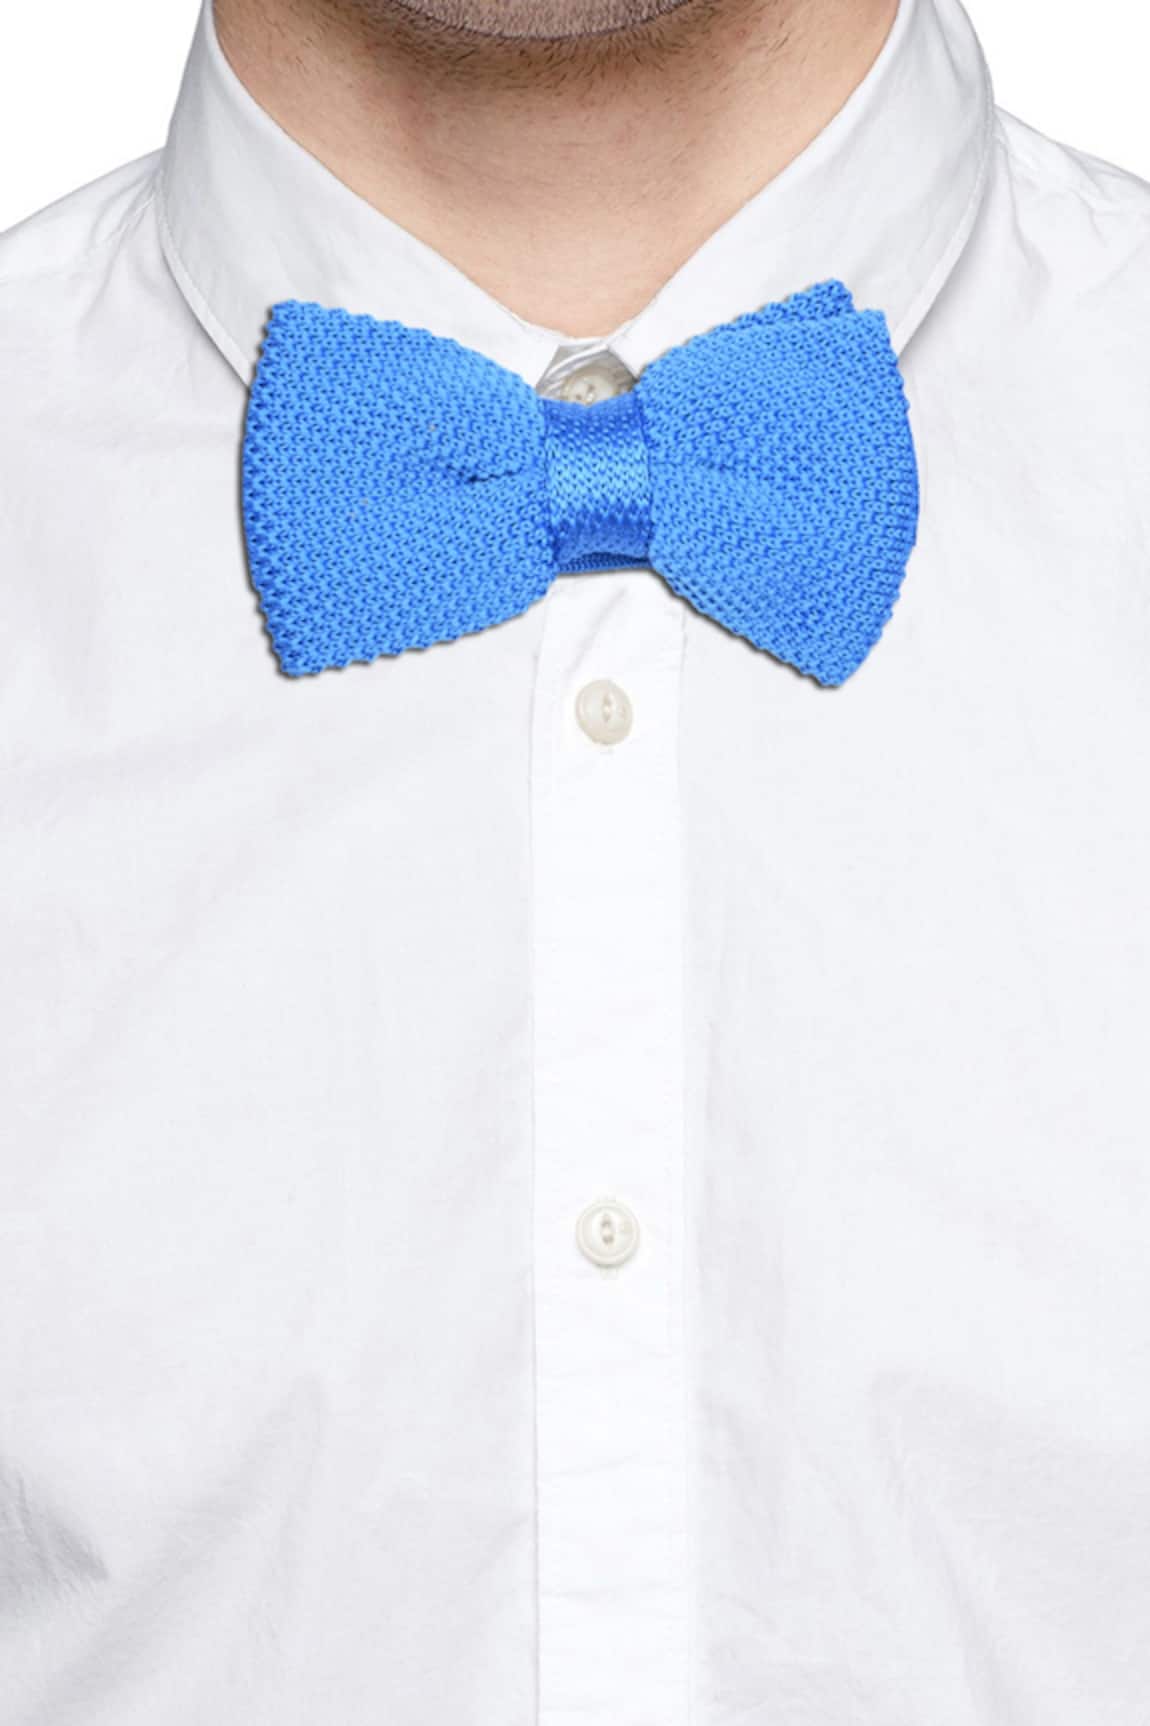 Tossido Embroidered Bow Tie